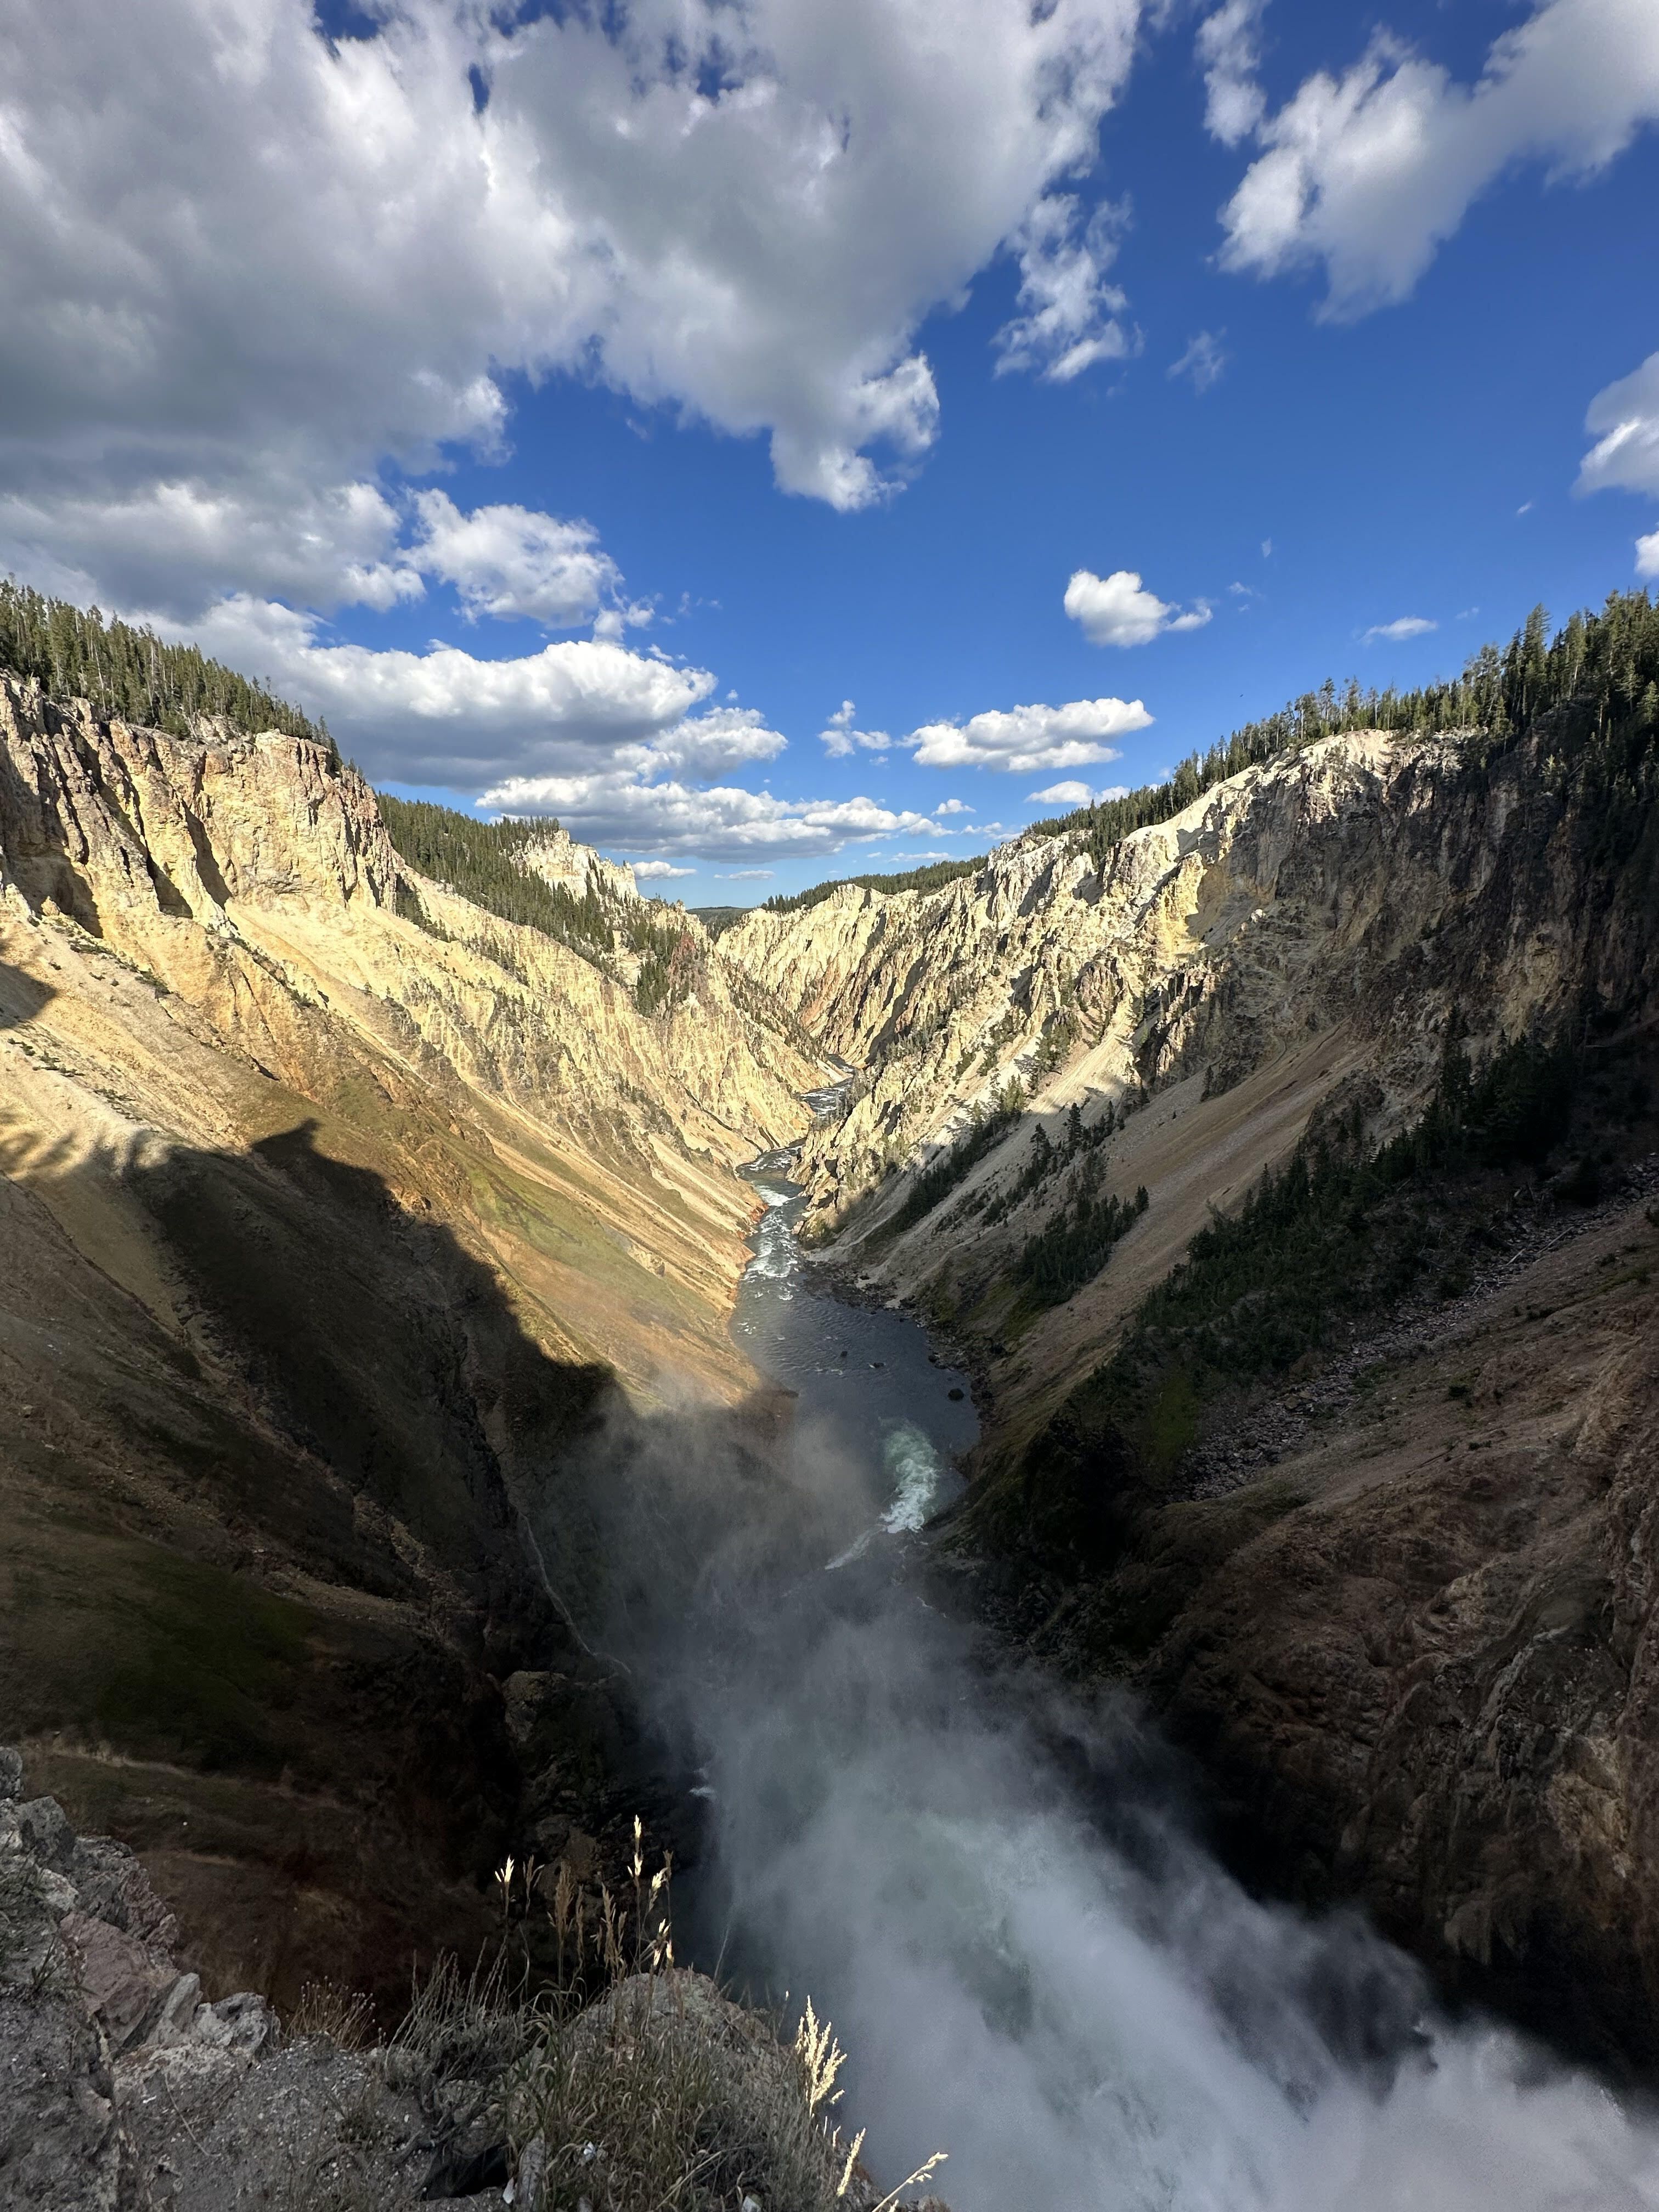 A view of the Yellowstone Canyon